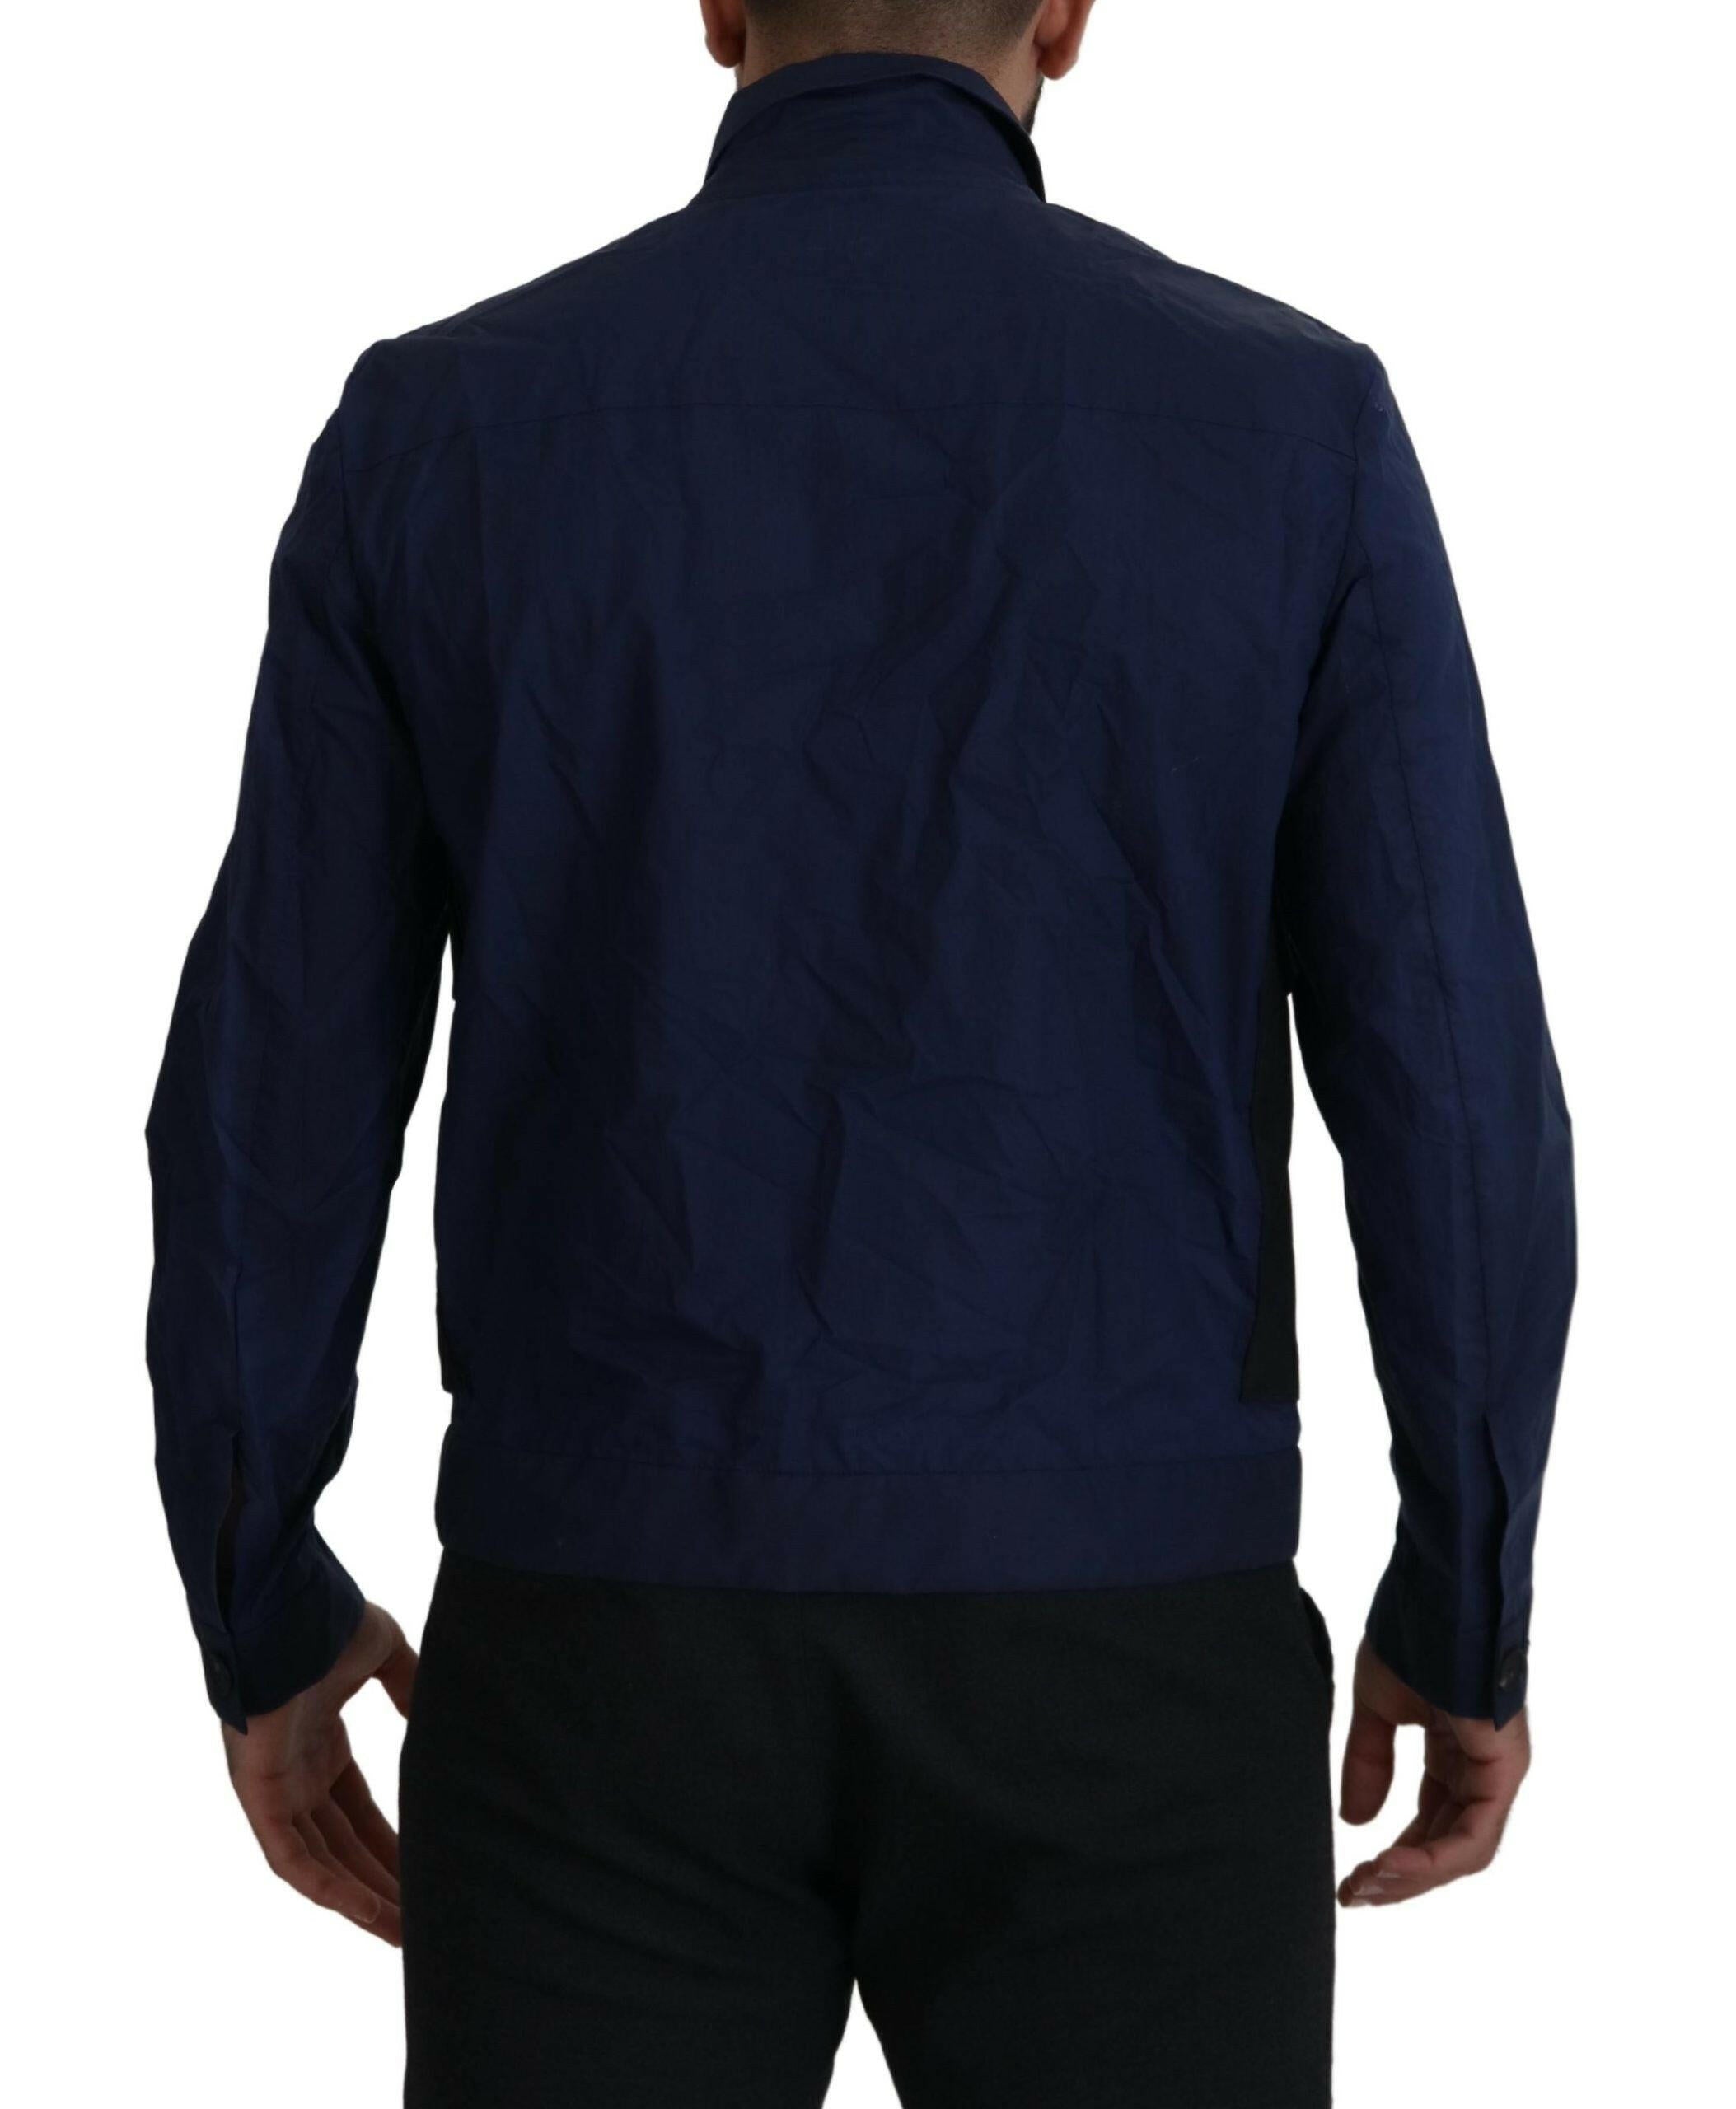 Dsquared² Dark Blue Cotton Collared Long Sleeves Casual Shirt - GENUINE AUTHENTIC BRAND LLC  